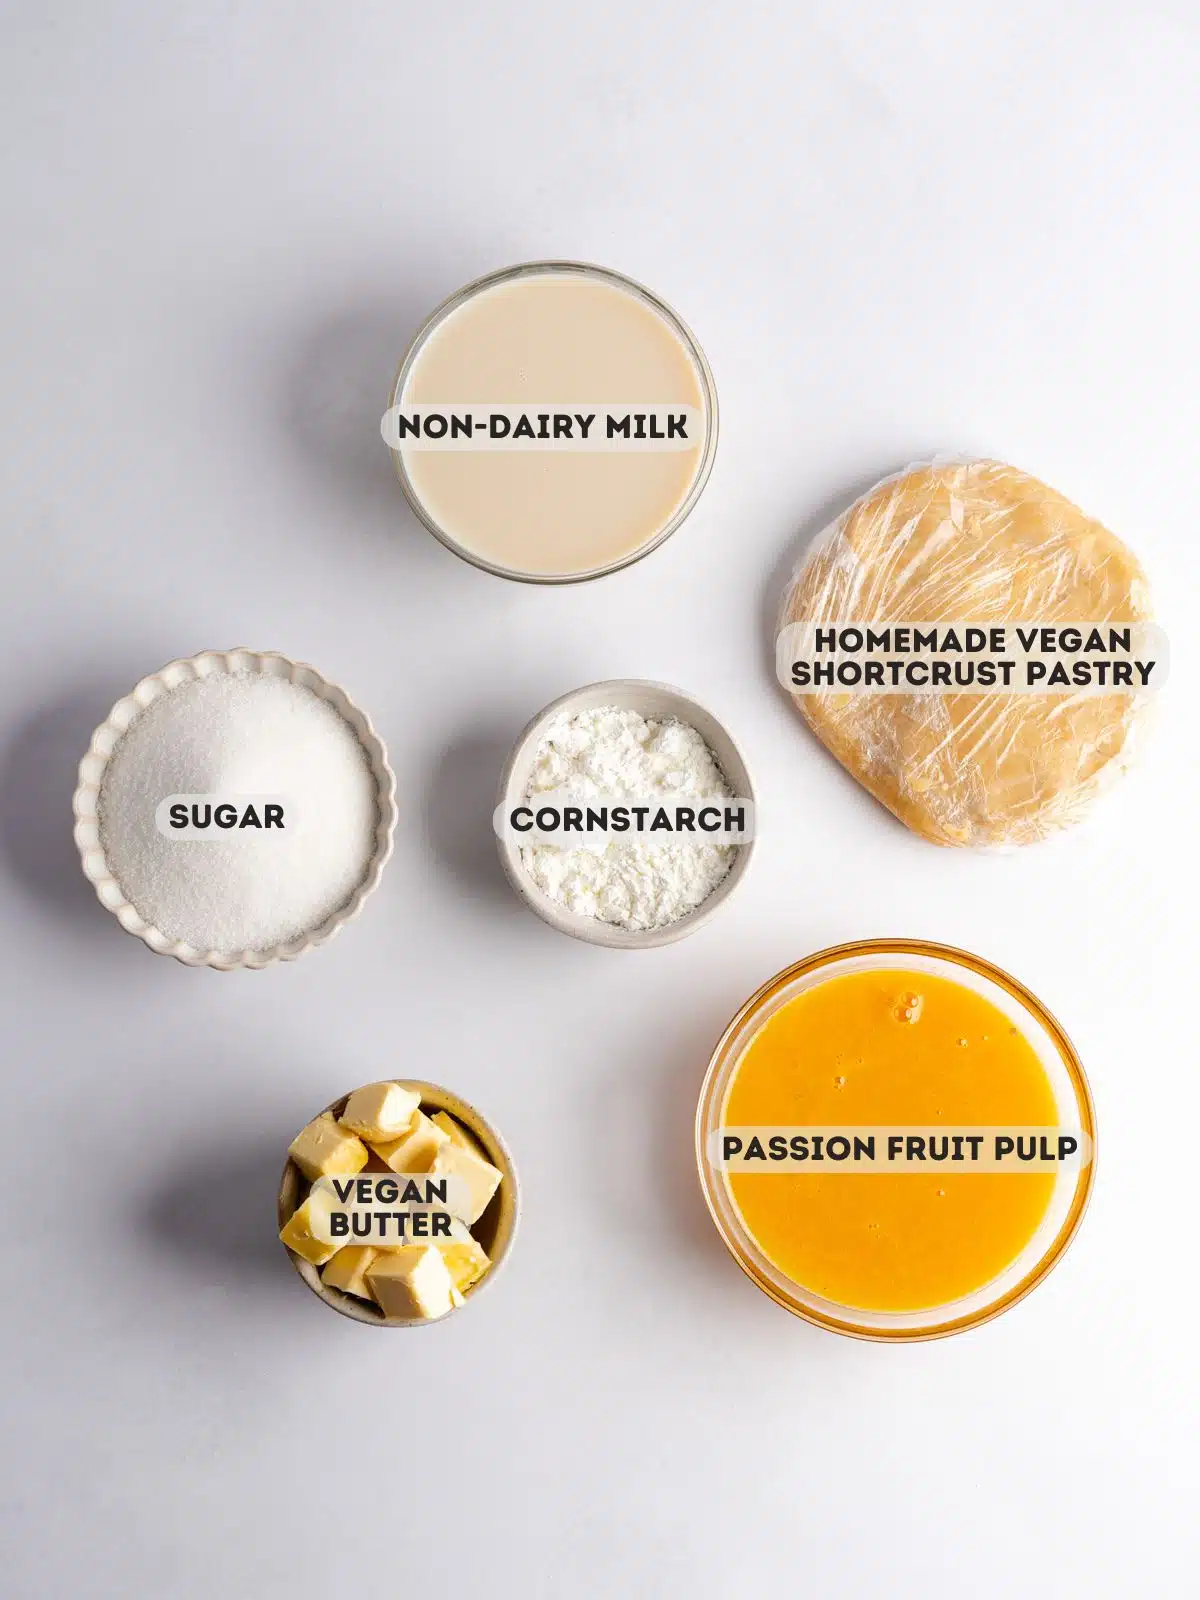 ingredients to make vegan passionfruit tart measured out in bowls on a gray surface.